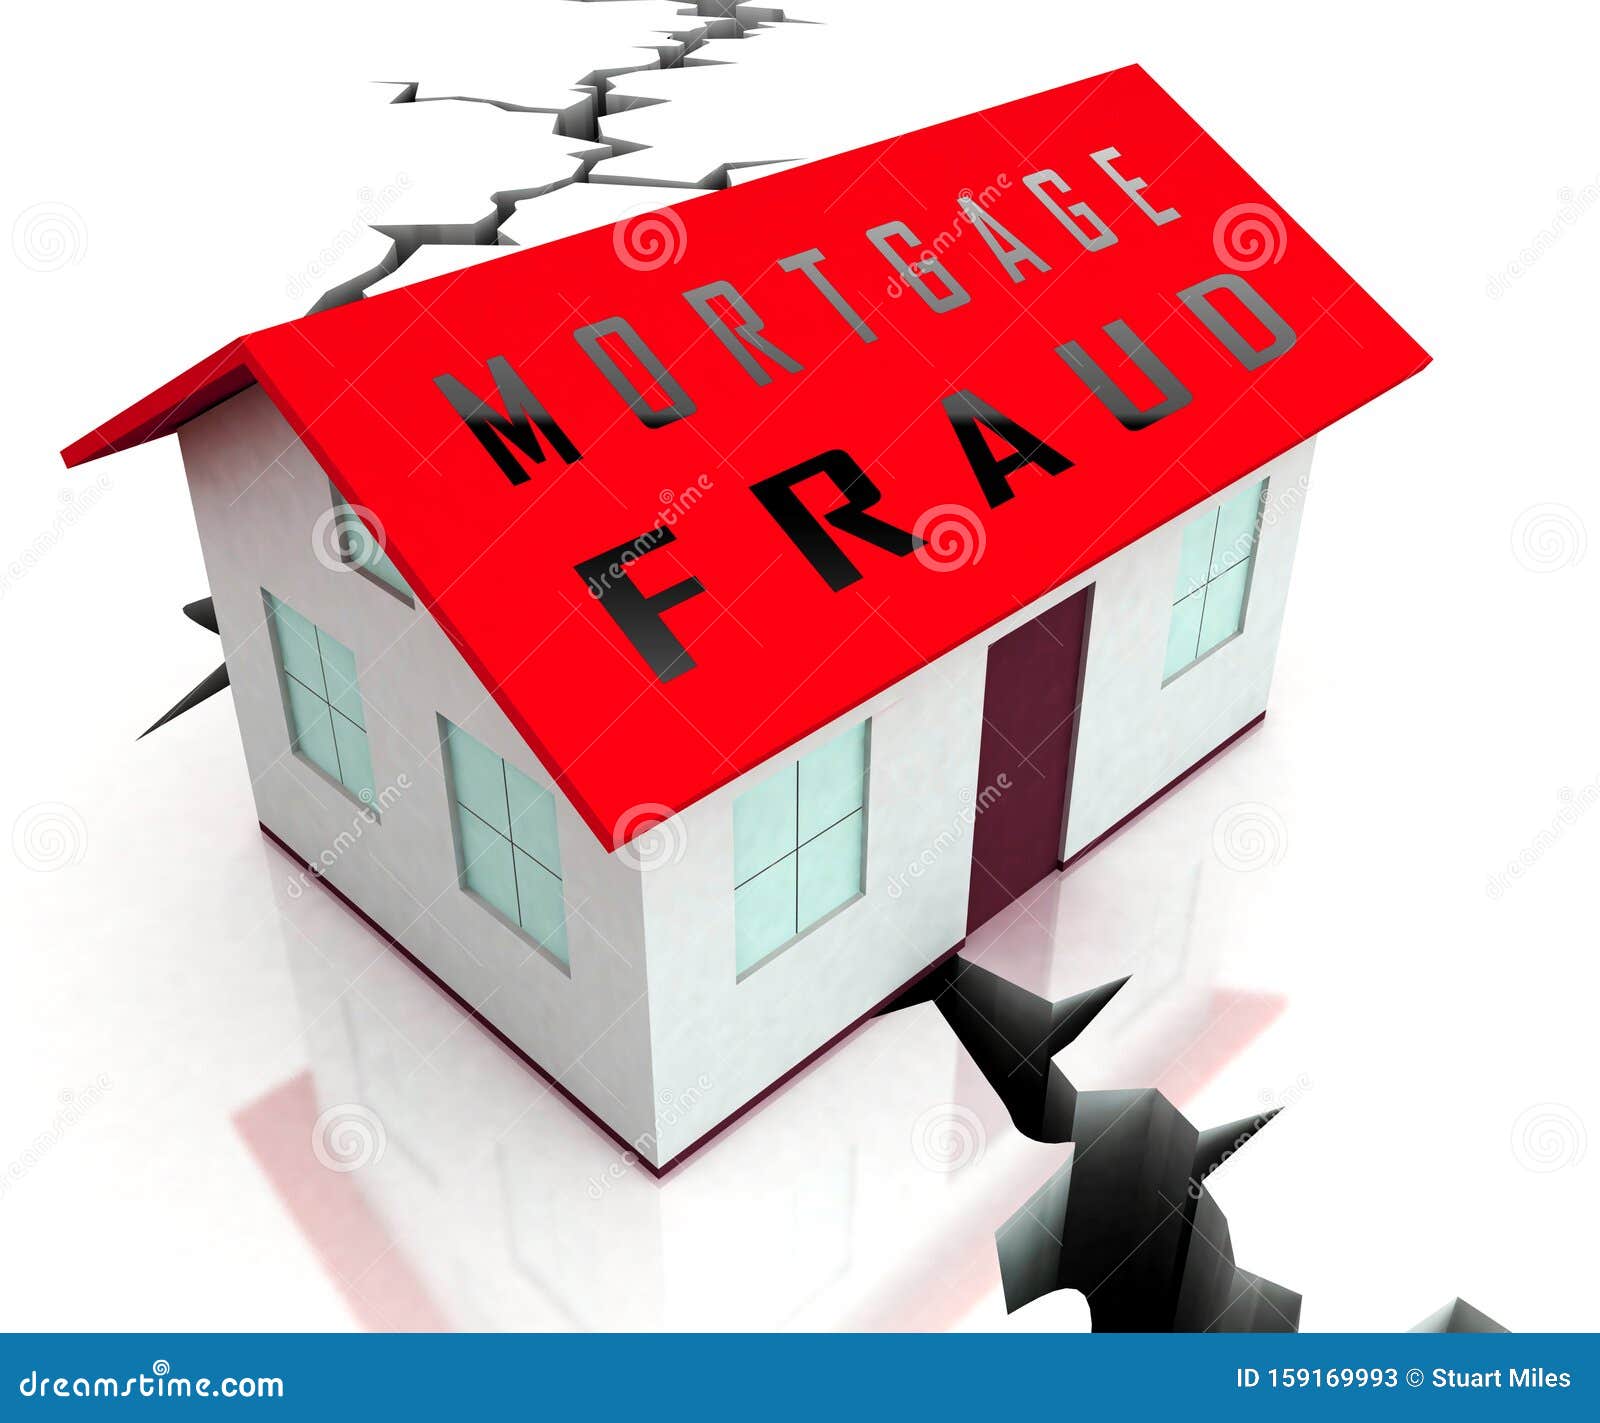 Mortgage Fraud Icon Represents Property Loan Scam Or